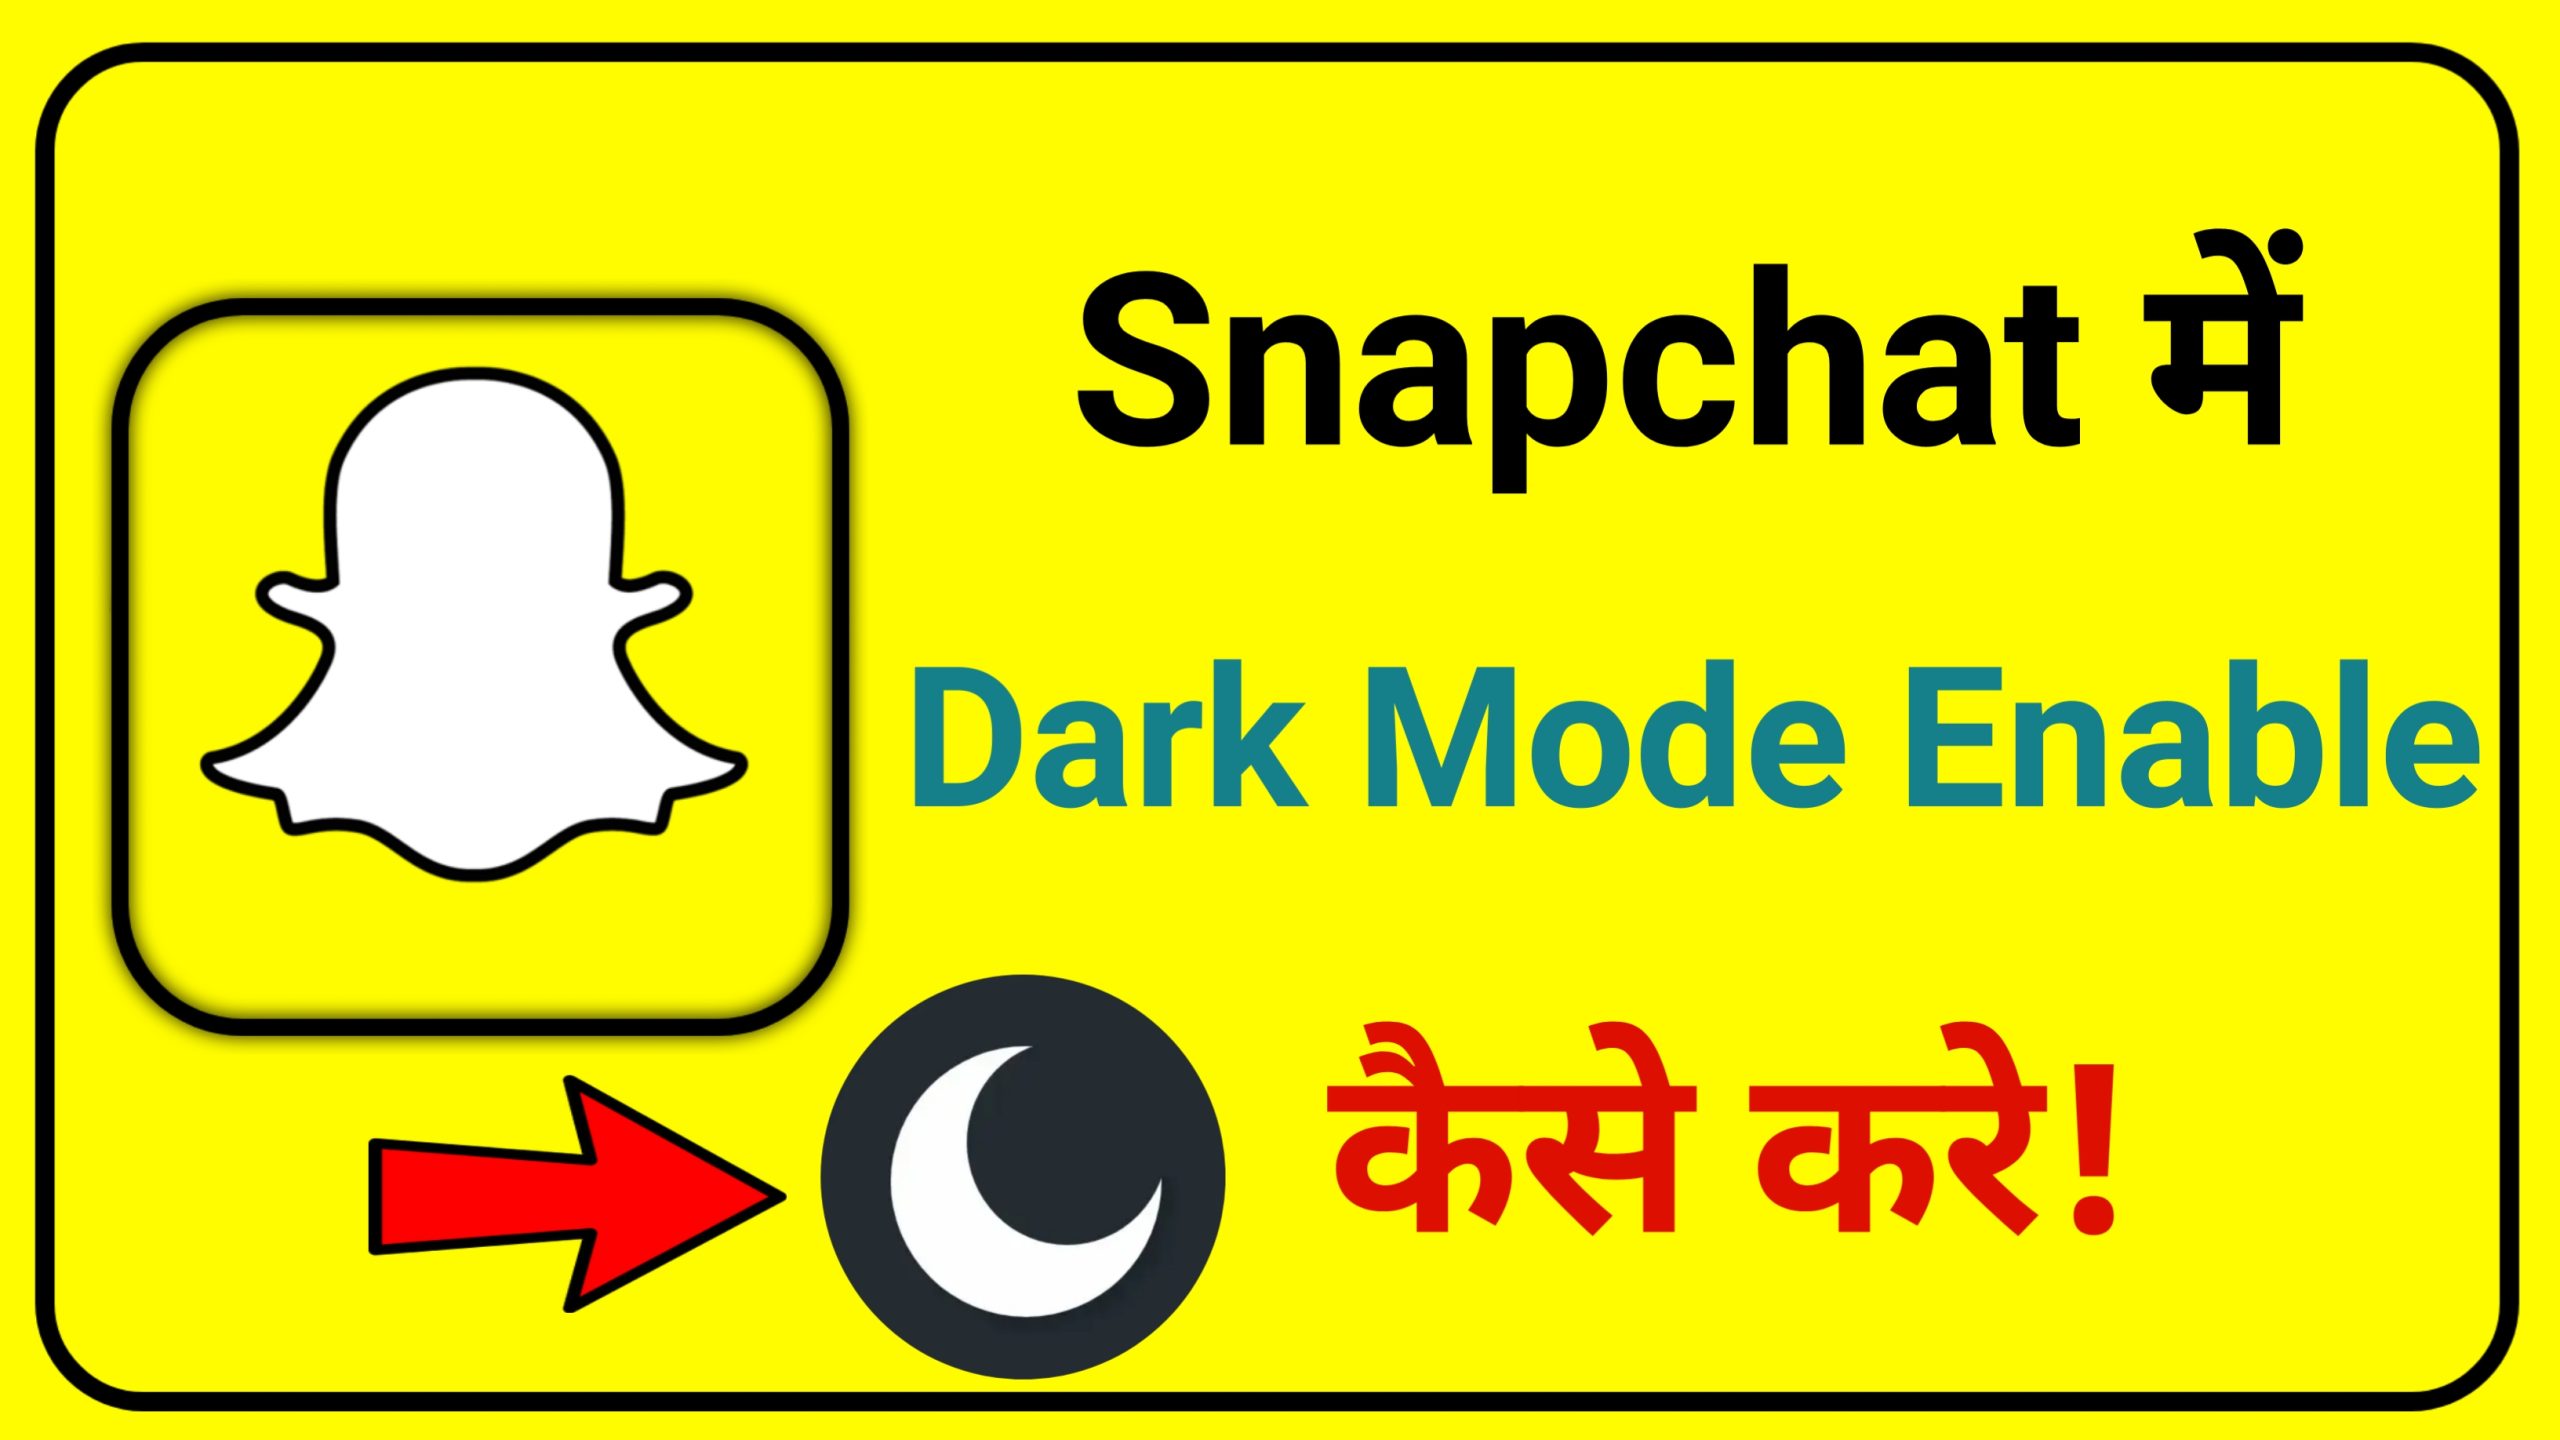 How to Enable Dark Mode in Snapchat | Snapchat me Dark Mode Enable Kaise kare